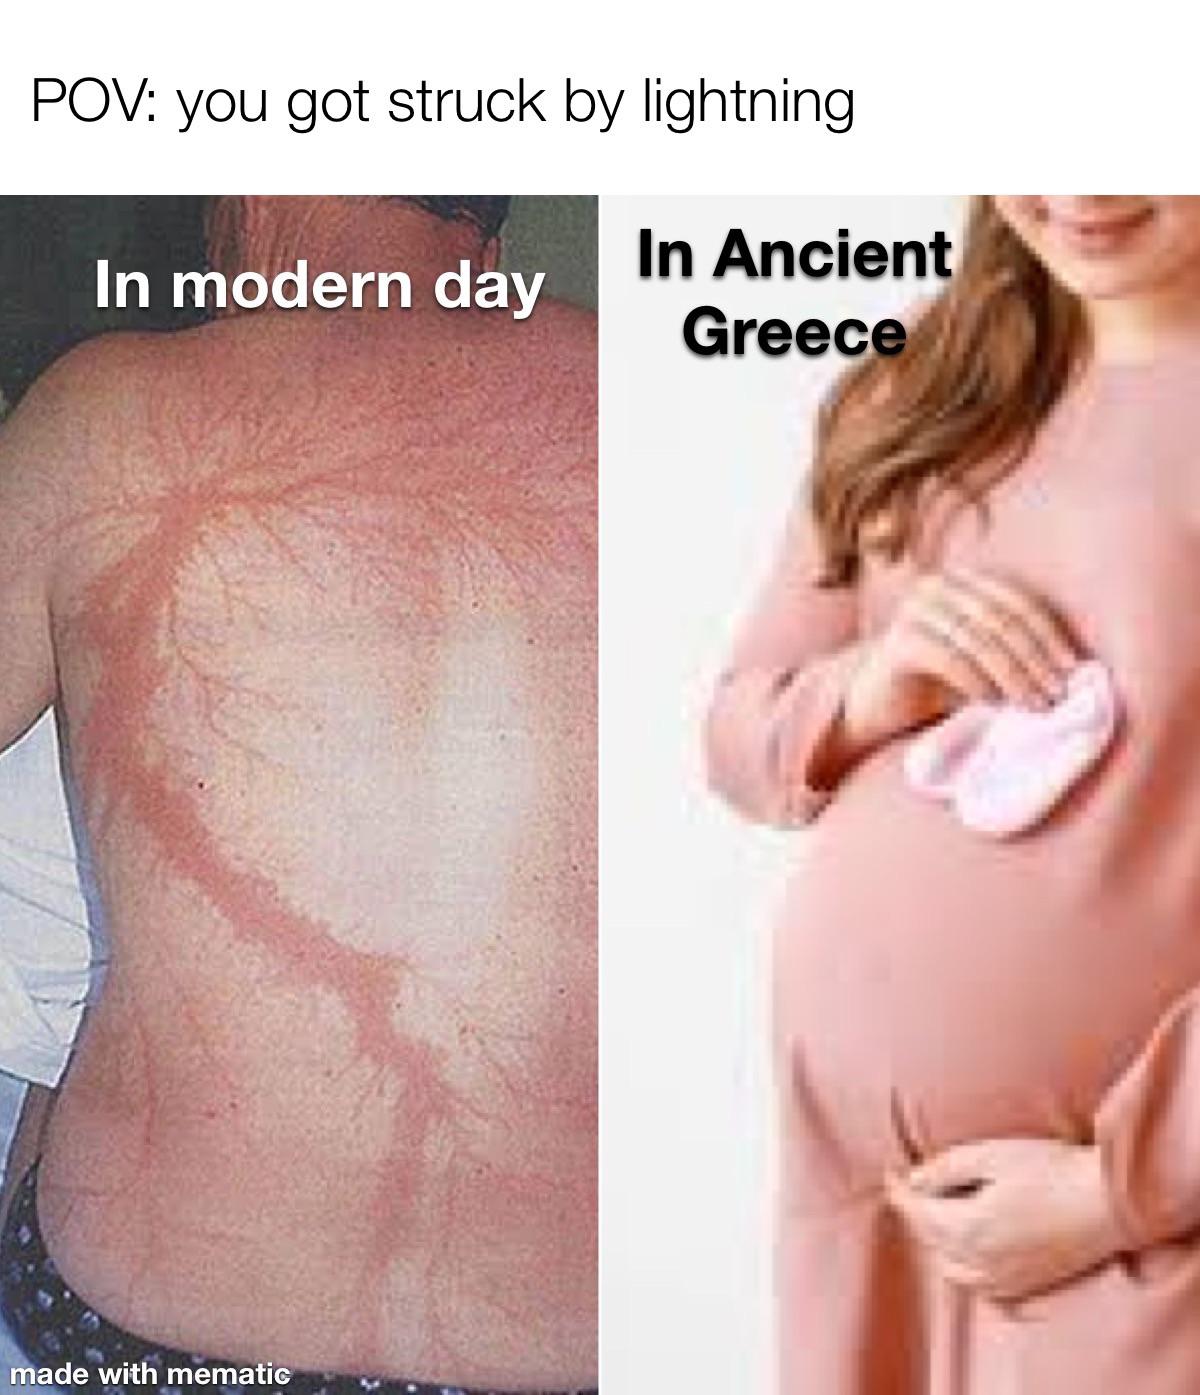 pregnant woman background - Pov you got struck by lightning In modern day In Ancient Greece made with mematic